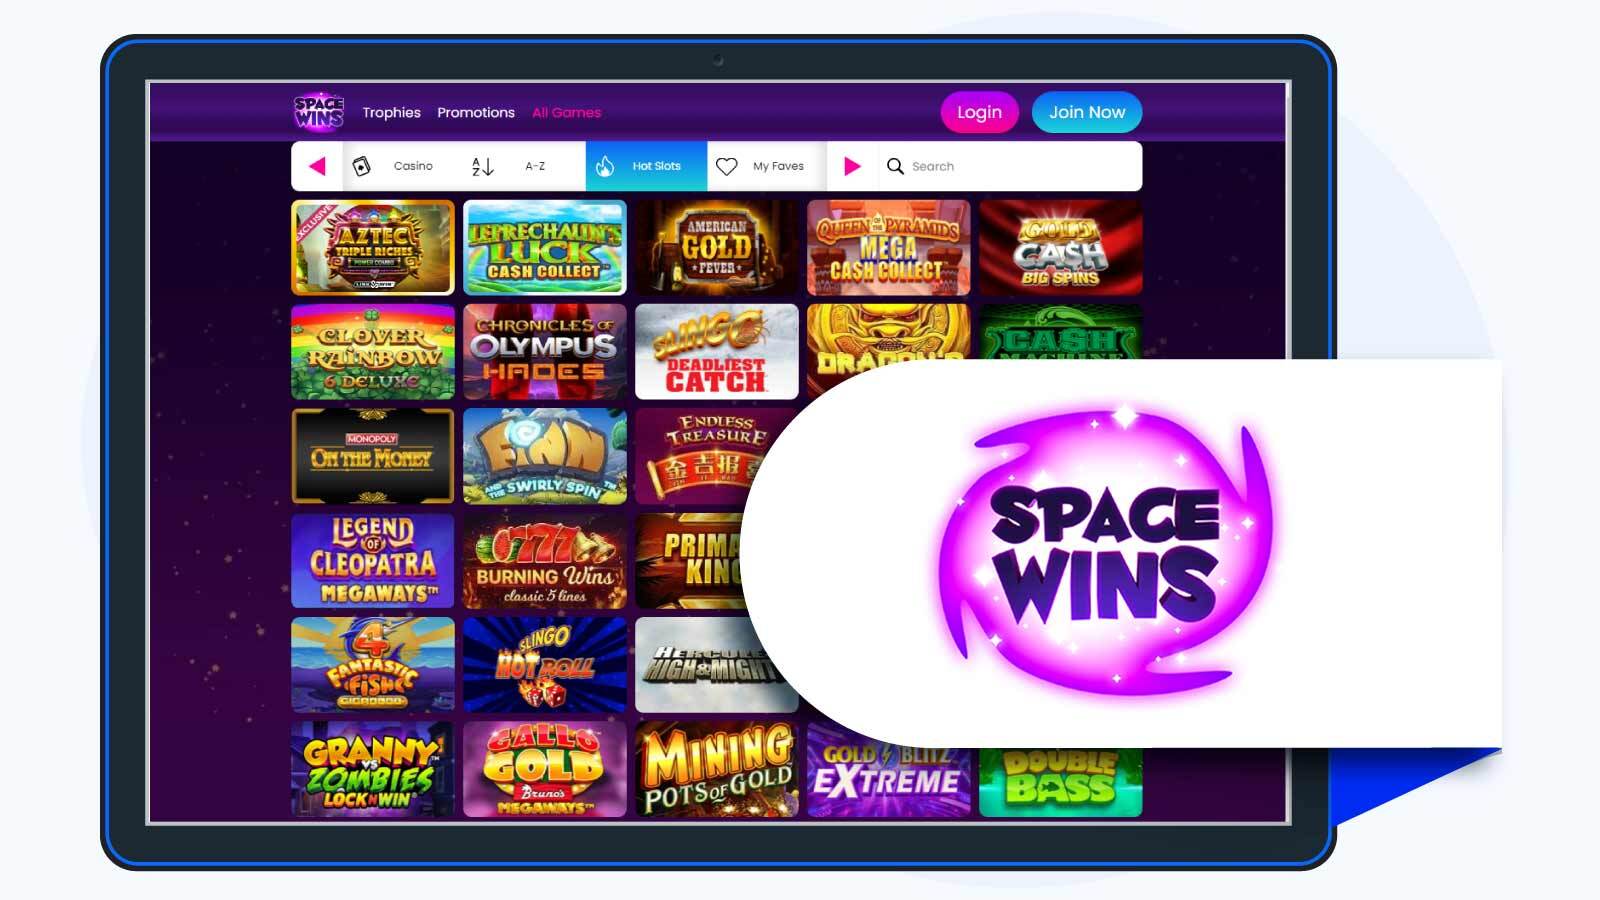 5 No Deposit Free Spins at Space Wins Casino